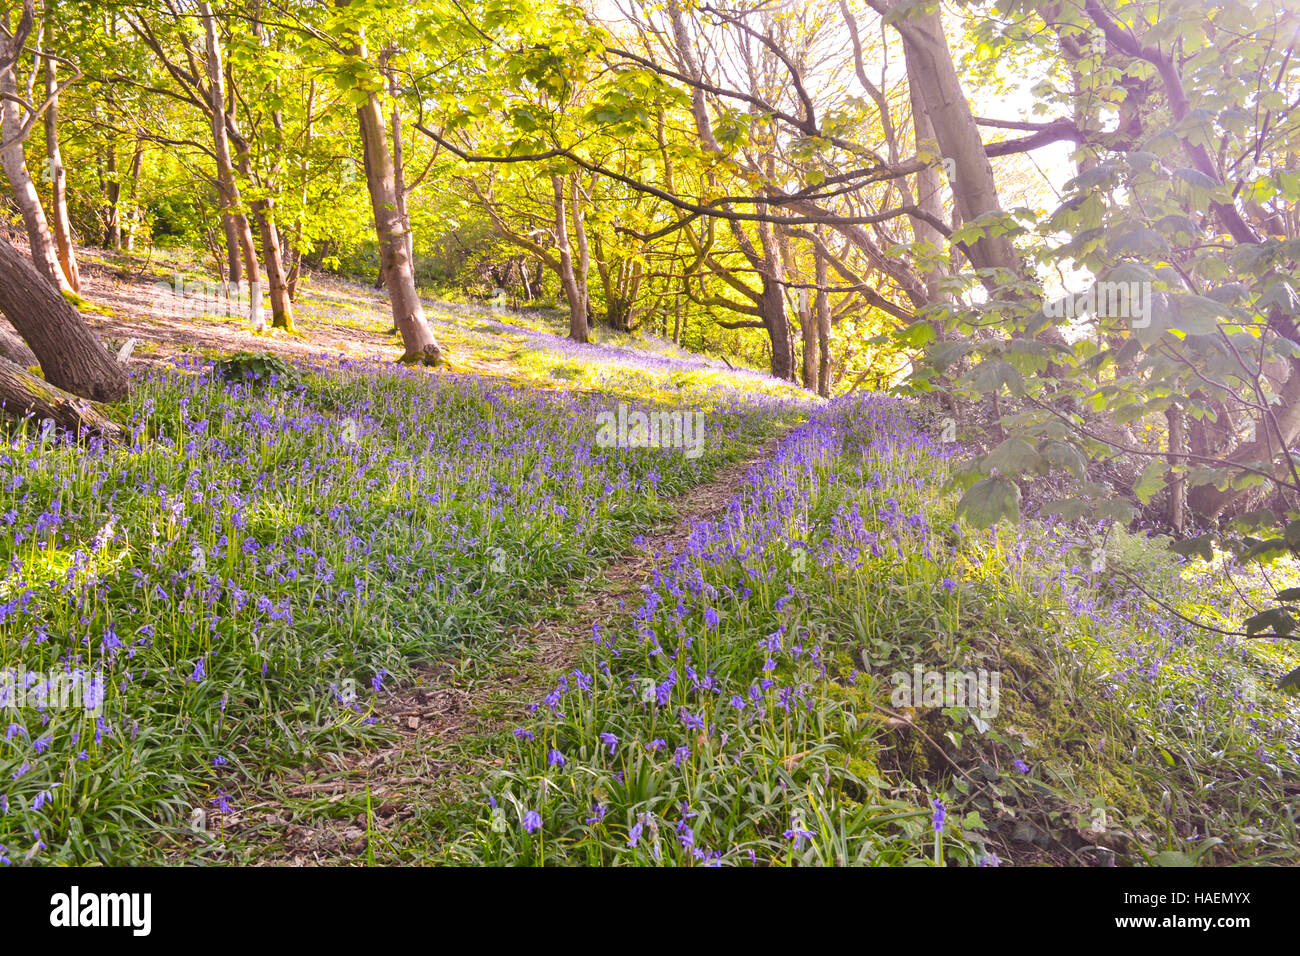 Forest filled with bluebells on the isle of Wight in Whitwell. Lovely blue flowers cascading across the woodland ground Stock Photo